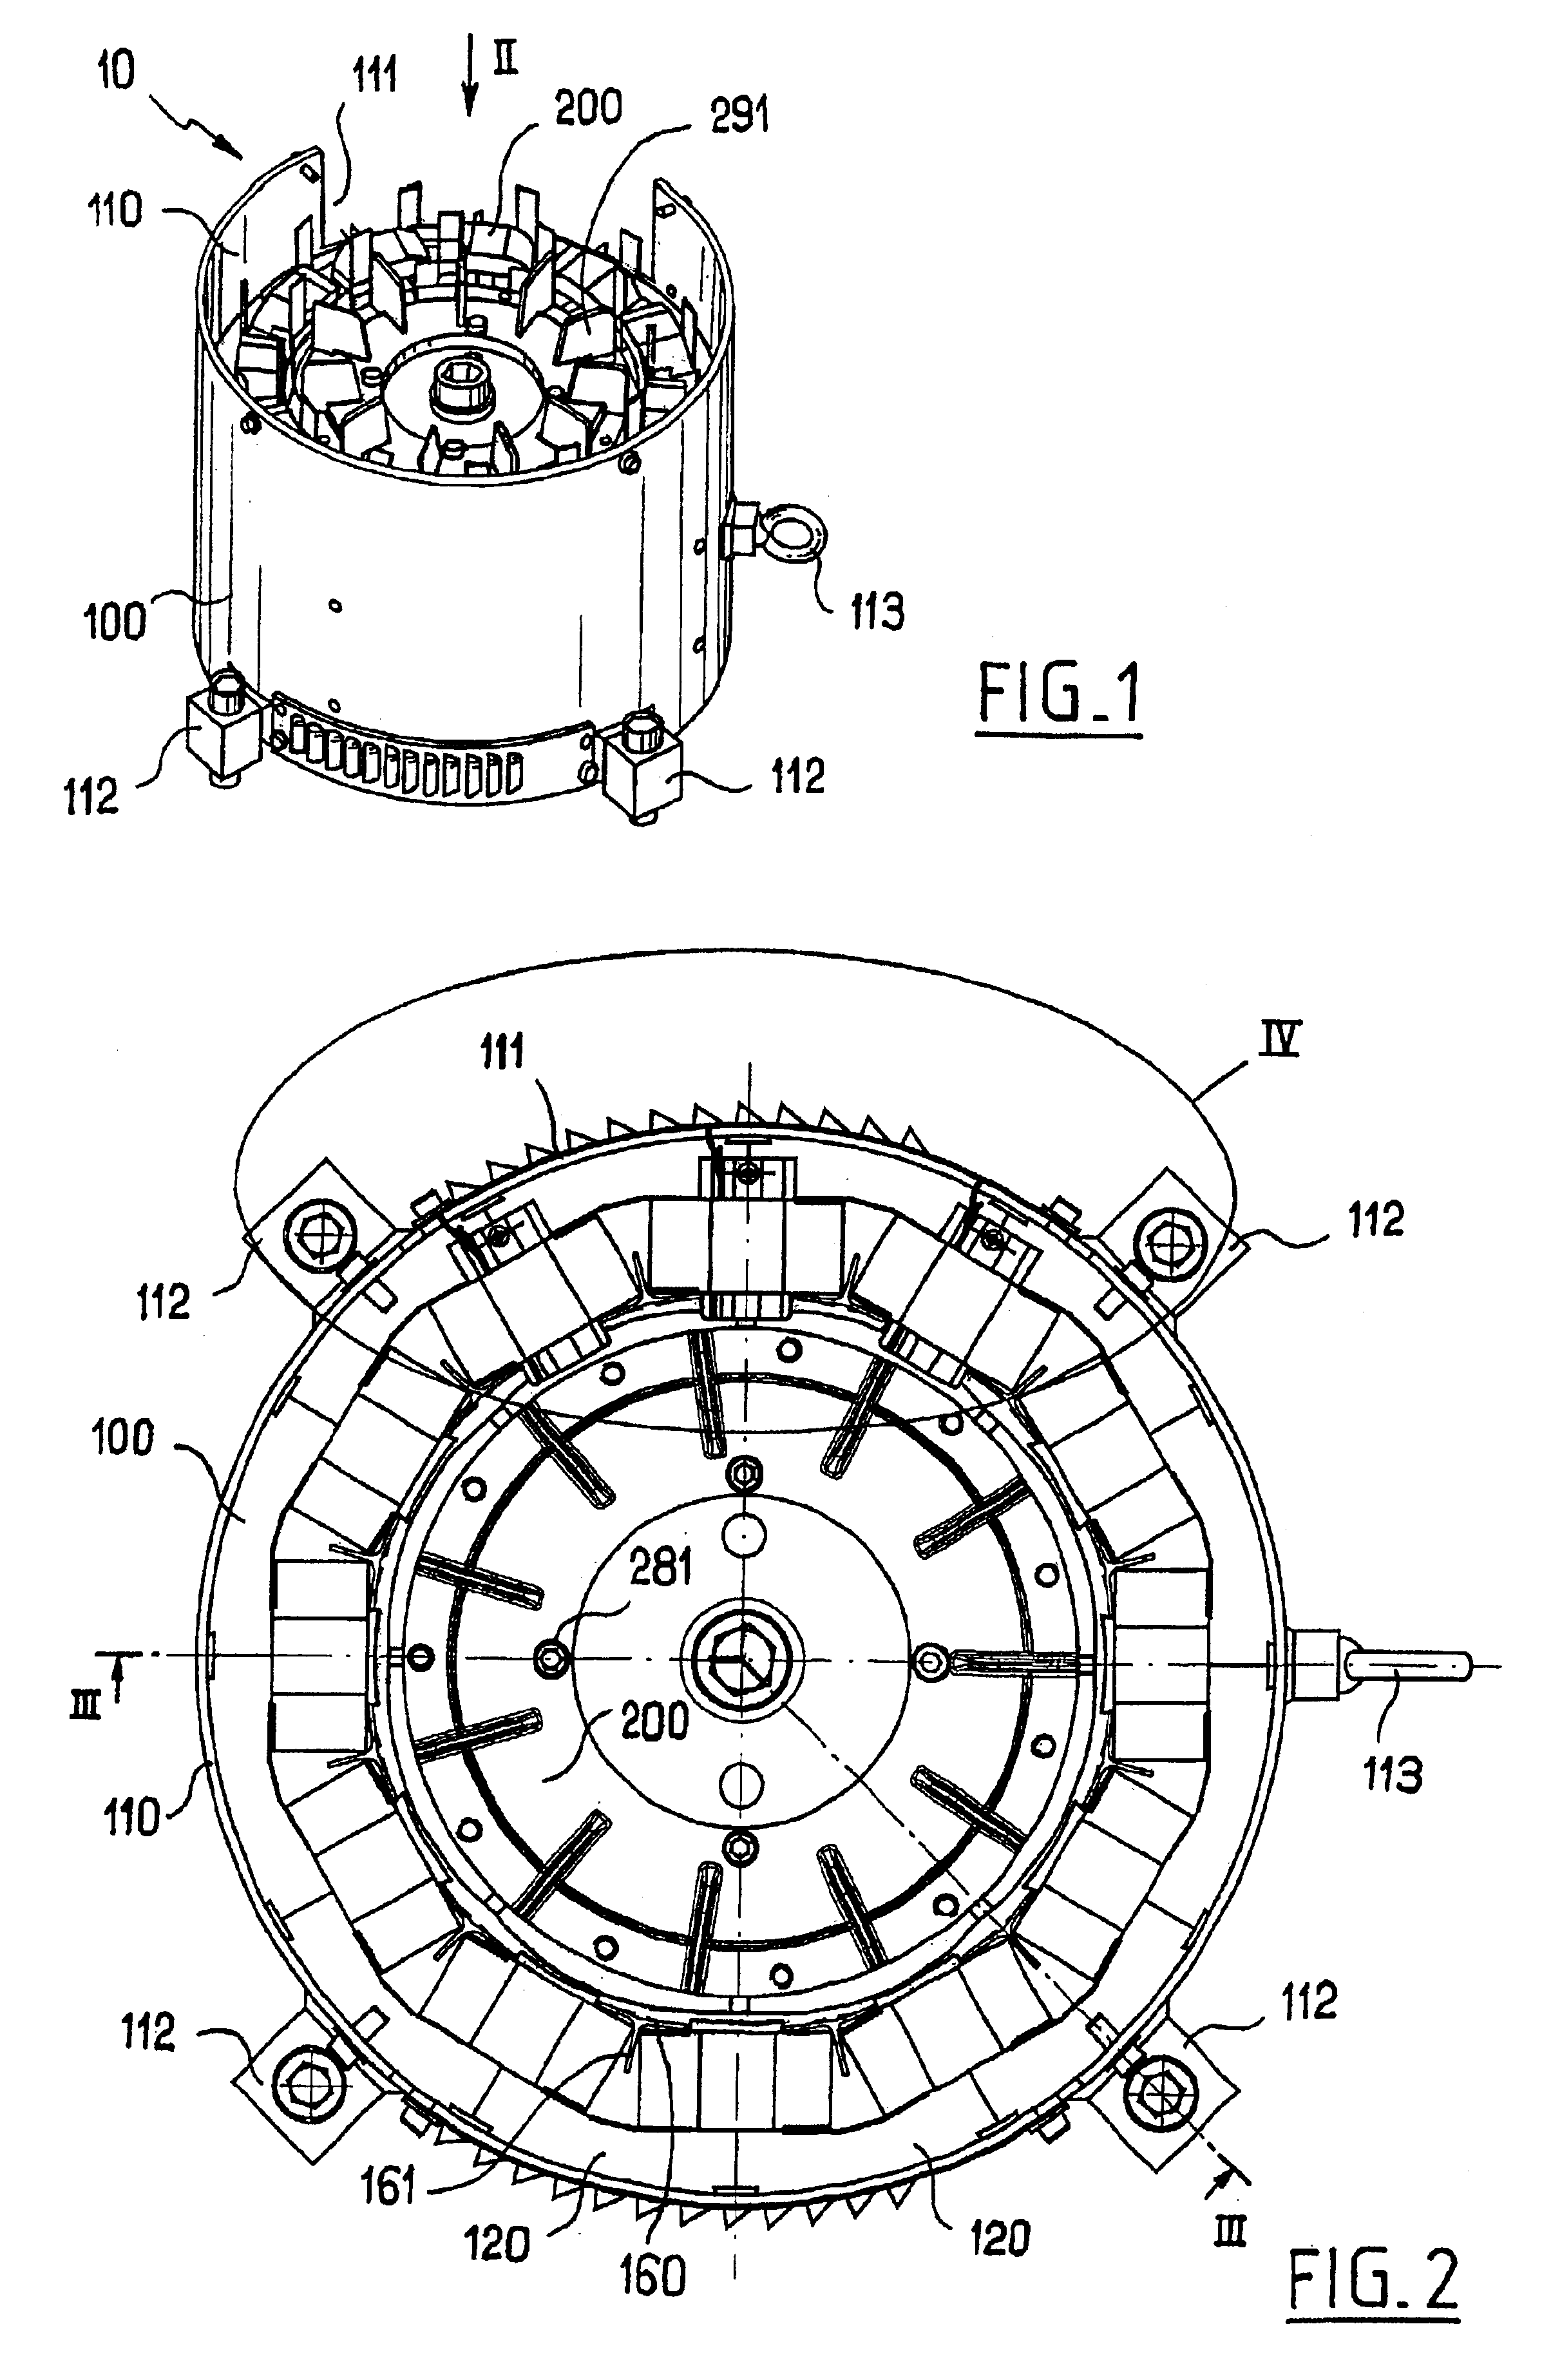 Rotary electric machine having a flux-concentrating rotor and a stator with windings on teeth